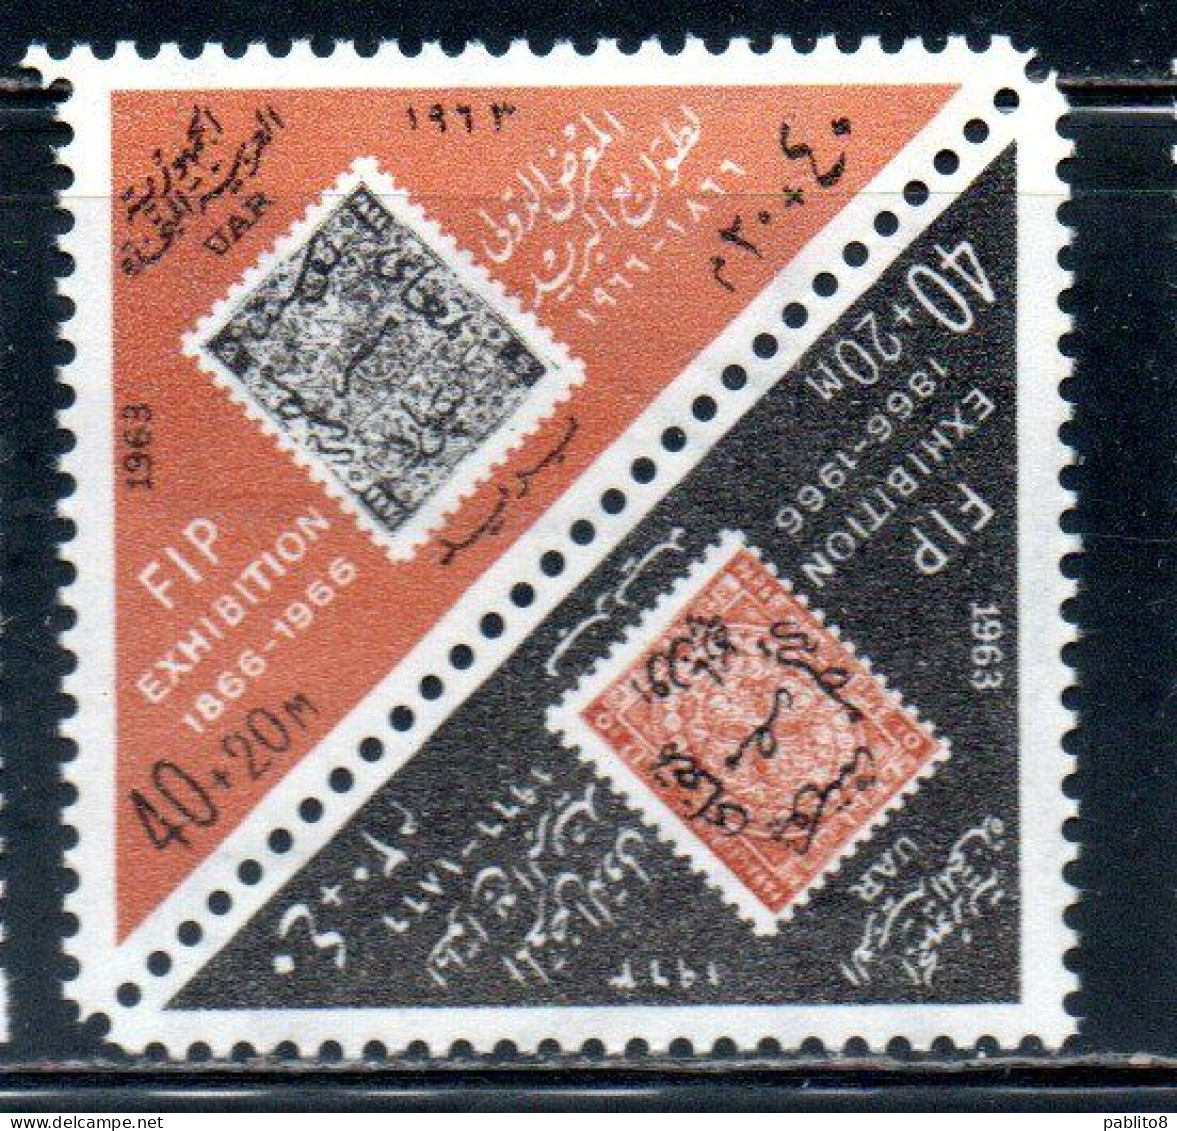 UAR EGYPT EGITTO 1963 POST DAY AND STAMP EXHIBITION 1966 OF THE FIP 40m + 20m MNH - Unused Stamps